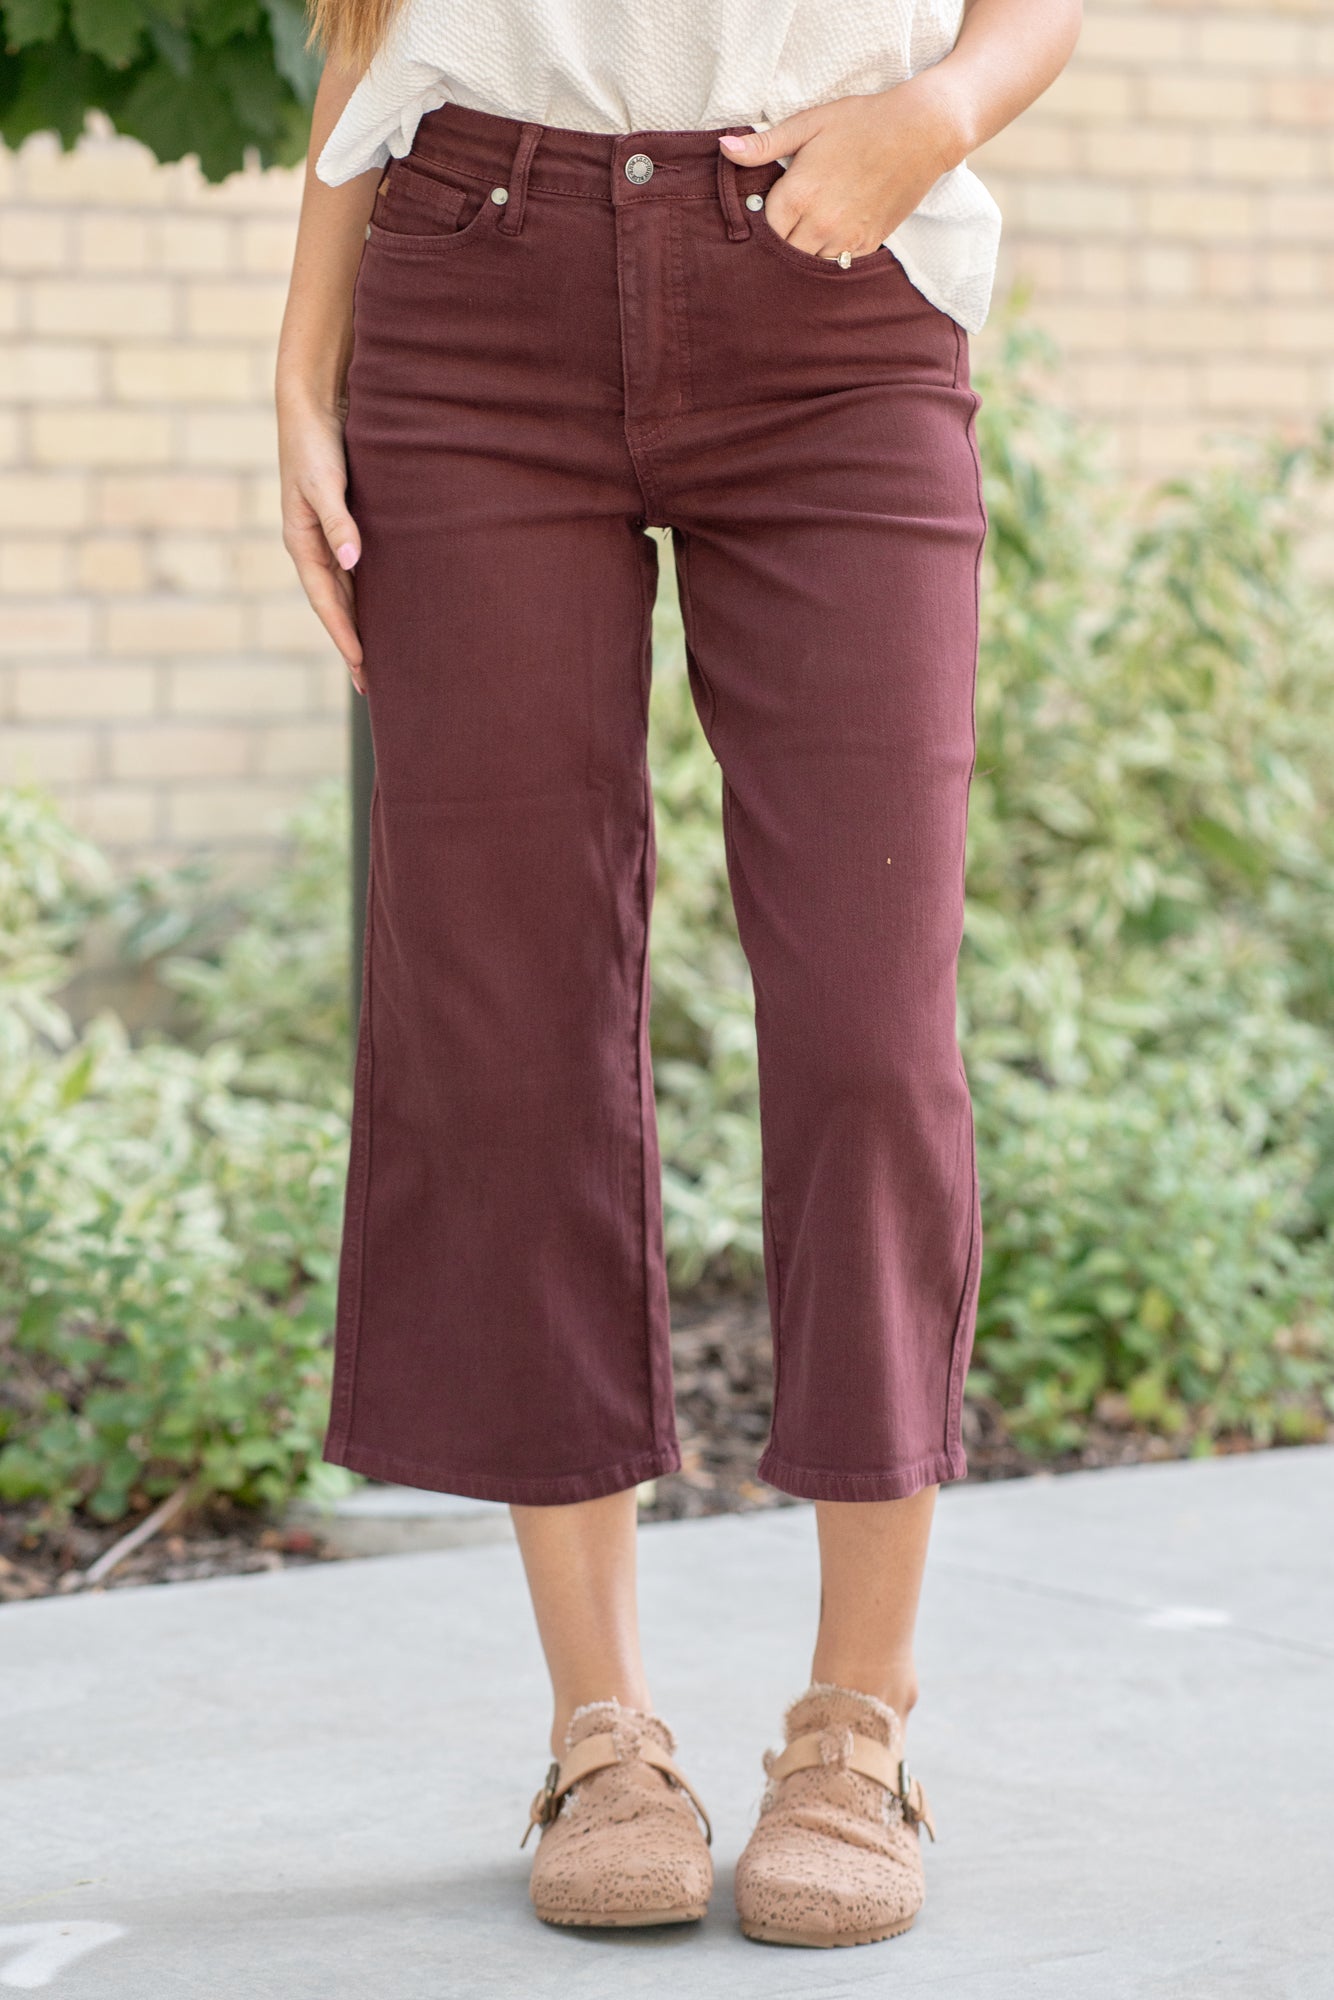 Judy Blue Jeans  Oxblood Tummy Control Top High Rise Wide Leg